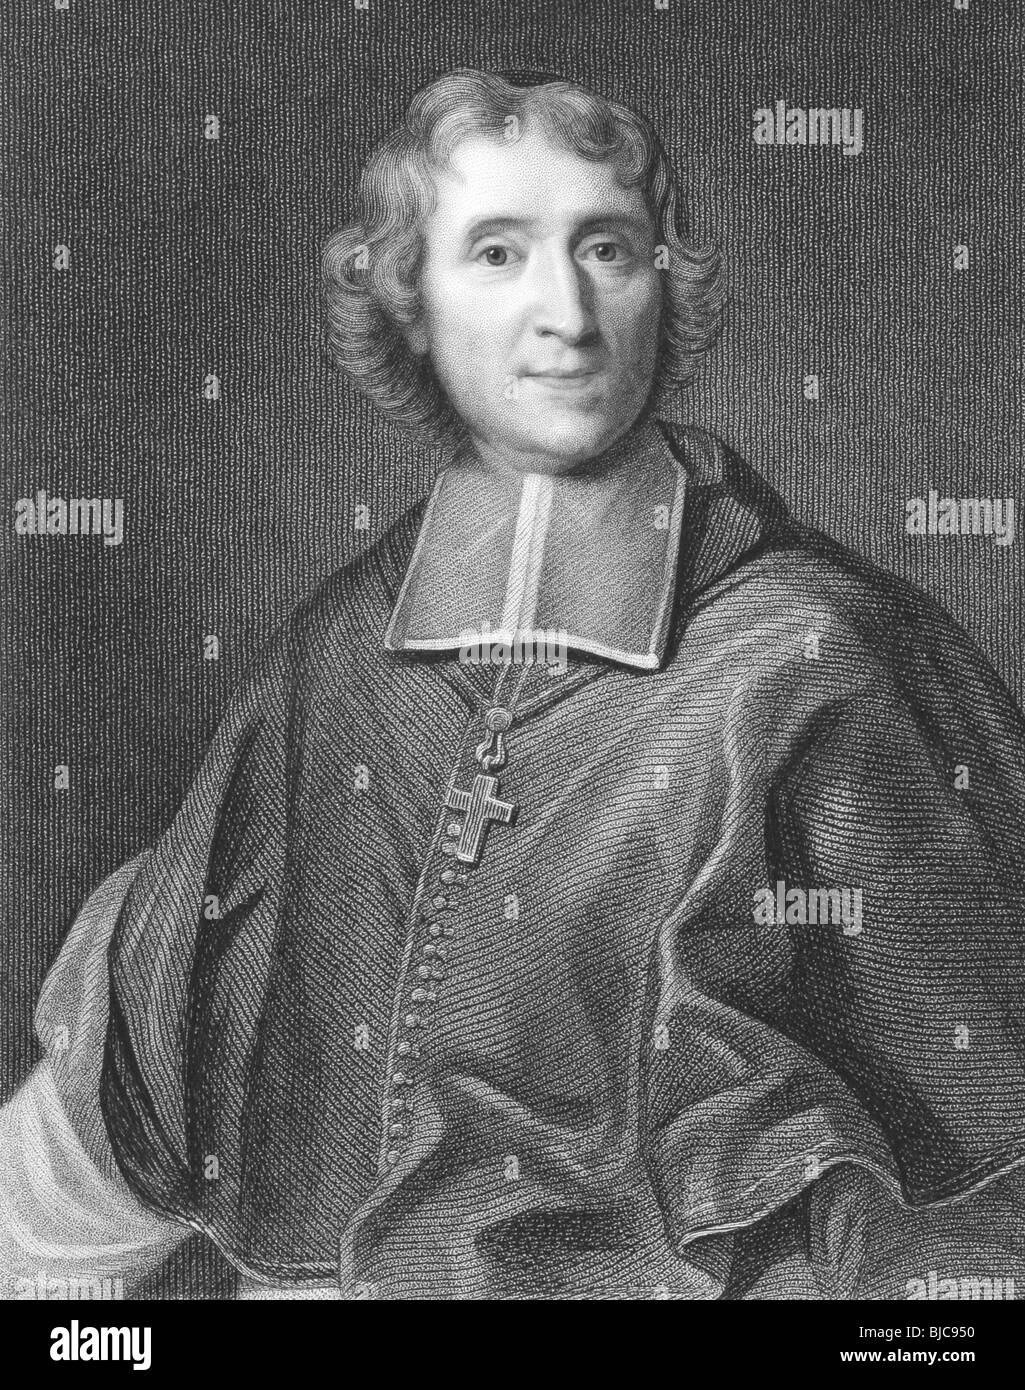 Francois Fenelon (1651-1715)  on engraving from the 1800s. French Roman Catholic theologian, poet and writer. Stock Photo